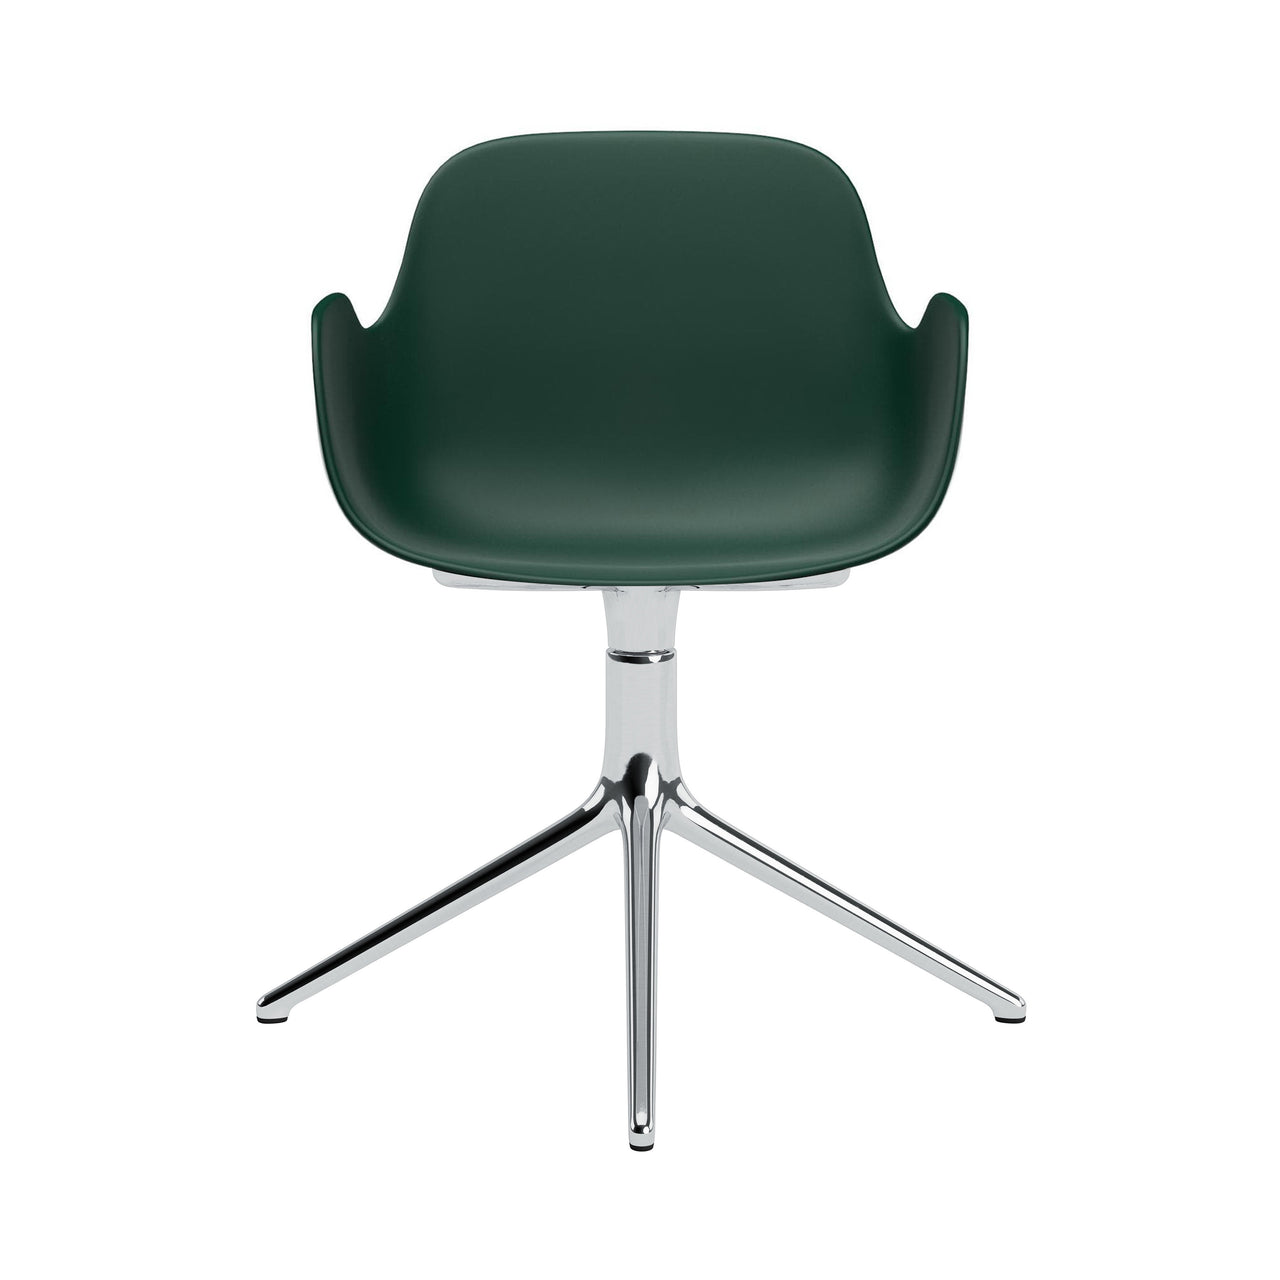 Form Armchair: Swivel + Green + Aluminum + Without Casters